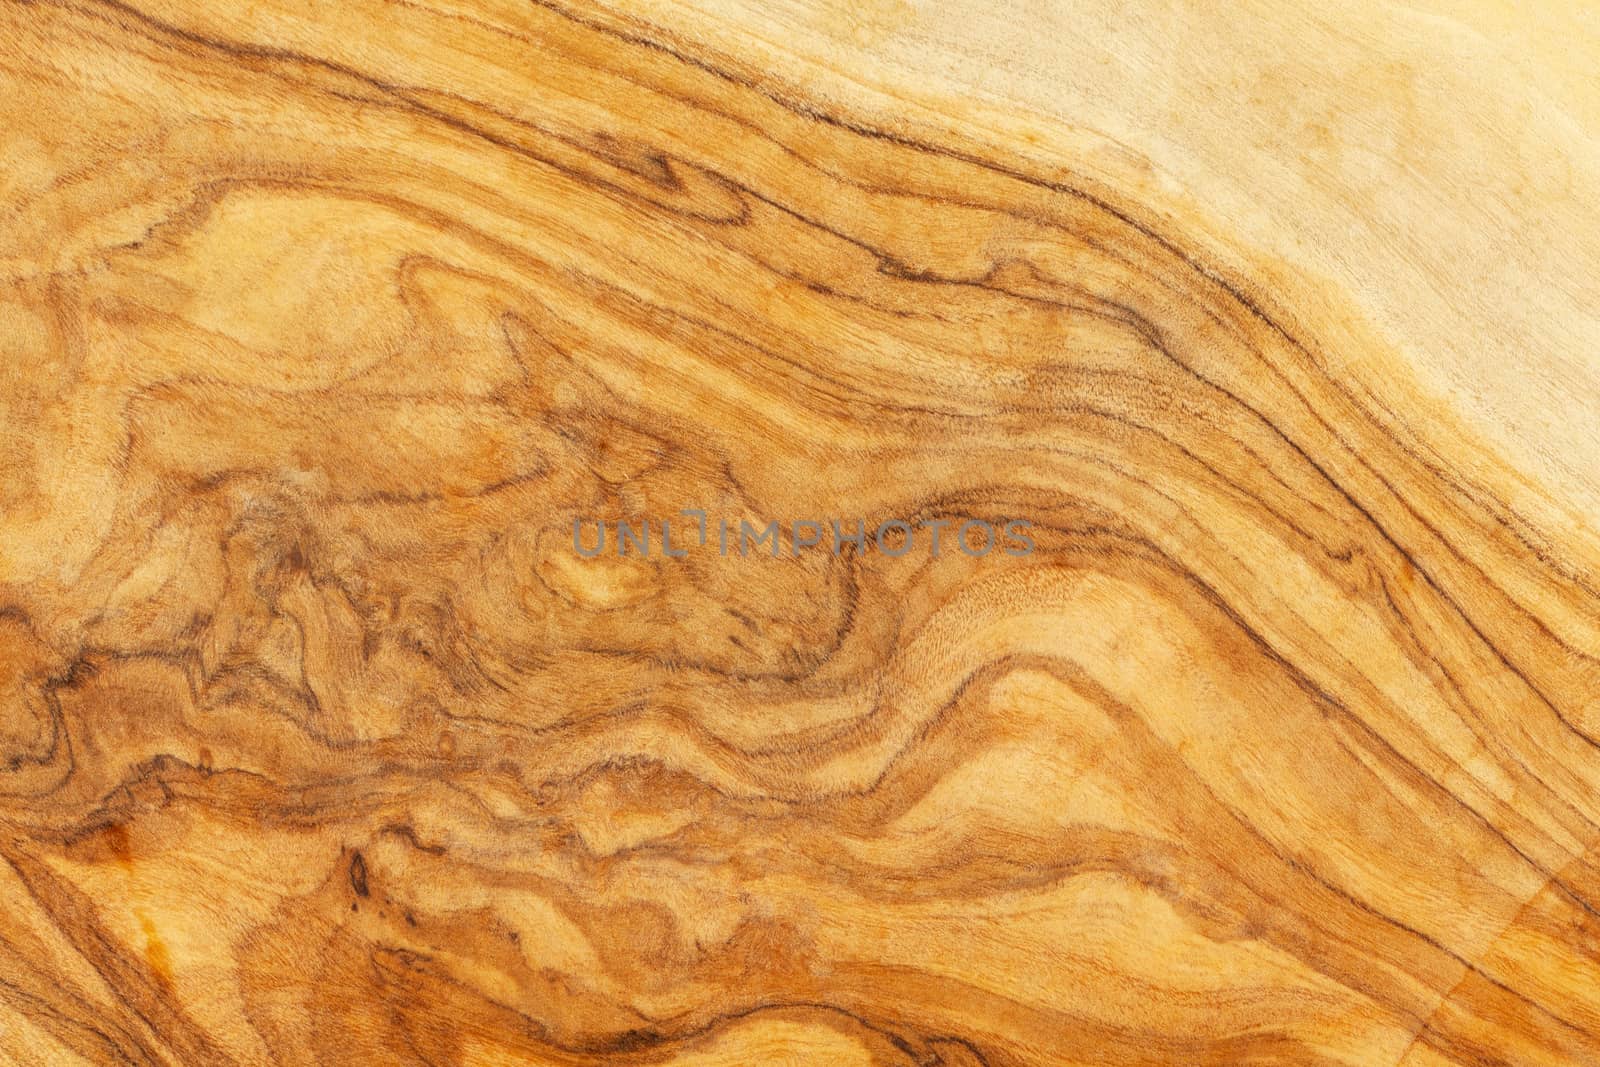 Natural olive wood texture, wooden cut background. Zero waste, eco-friendly, no plastic, go green, plastic free, environmental conservation, sustainable lifestyle concept. Copy space. Horizontal.